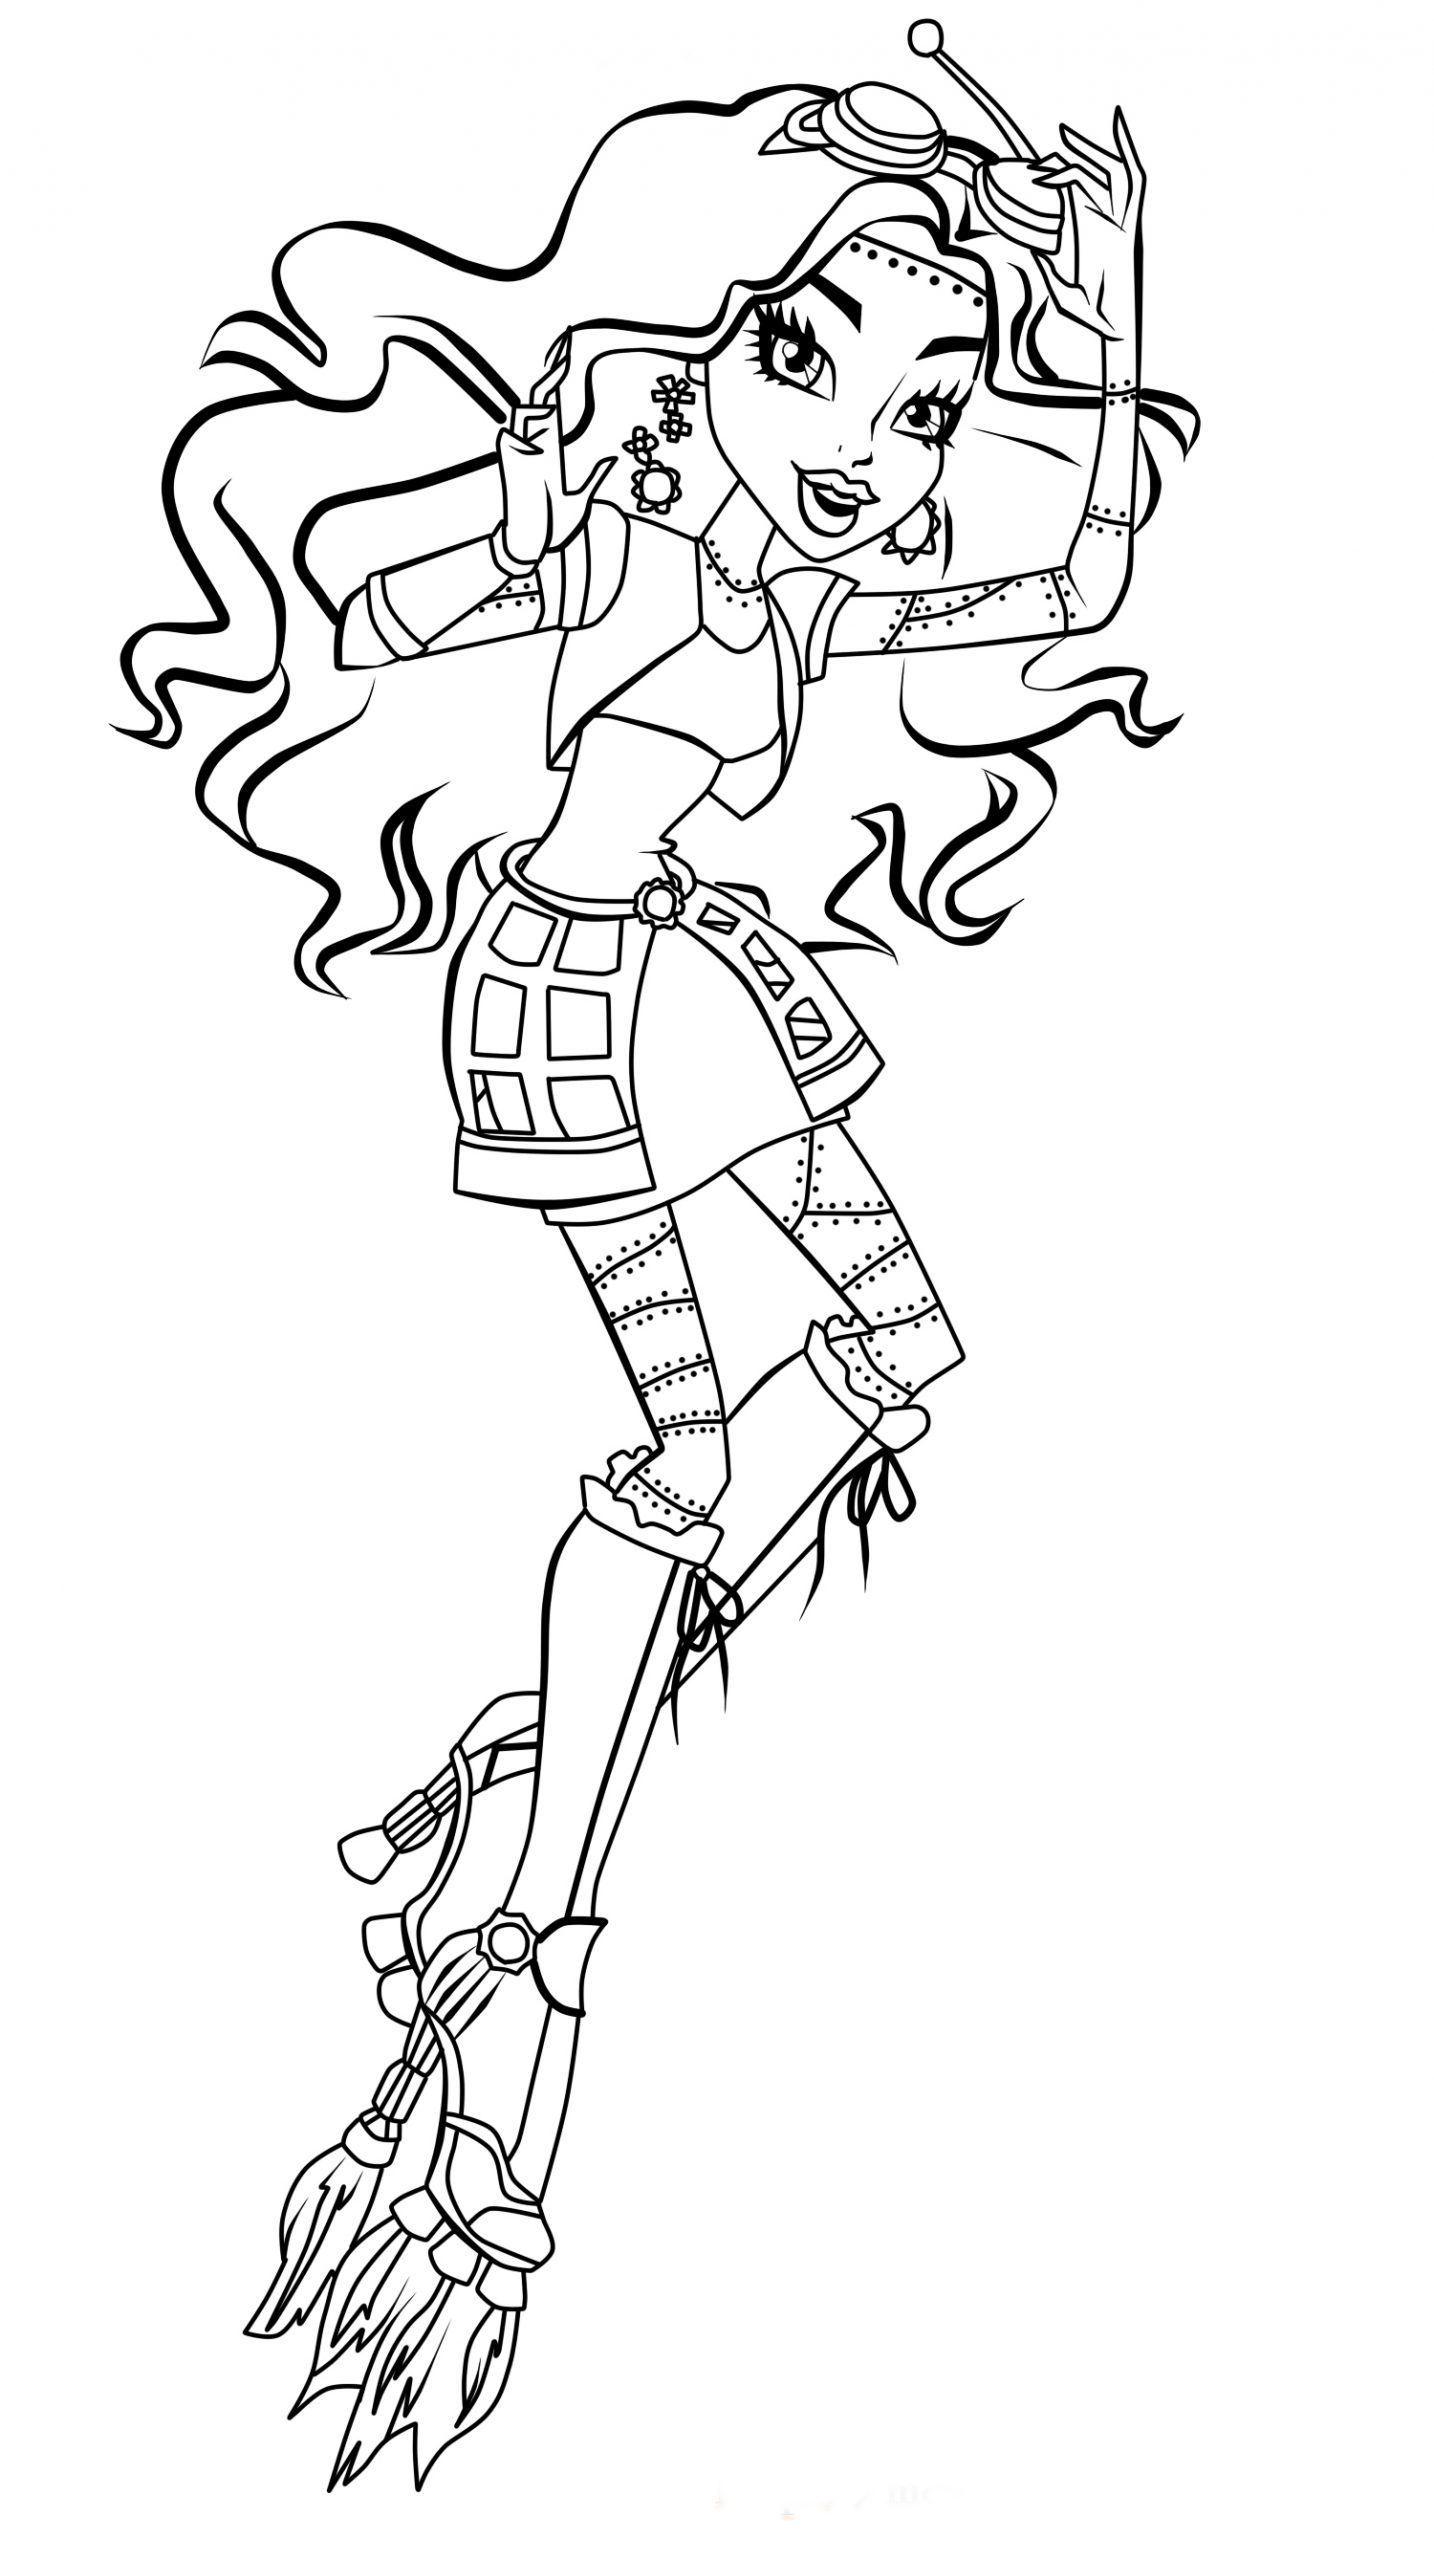 Monster high coloring page for girls